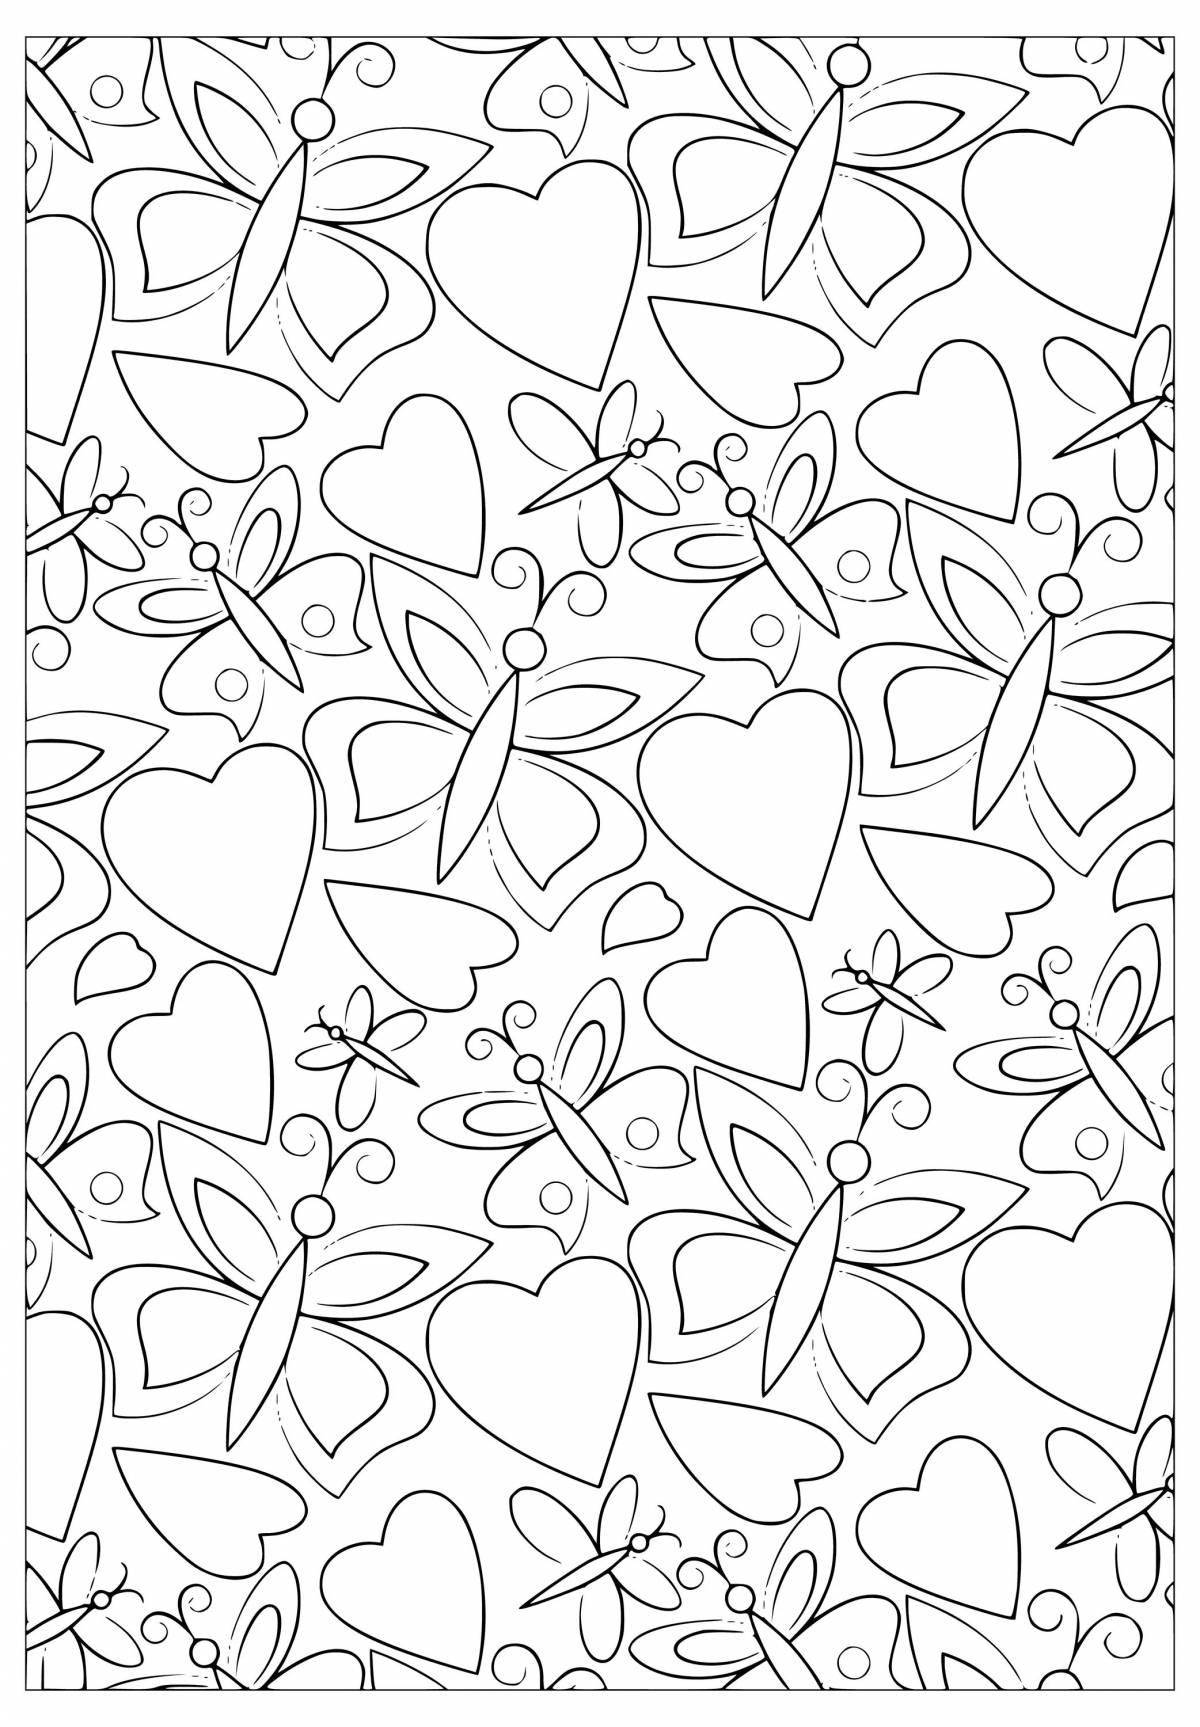 Colouring happy little hearts